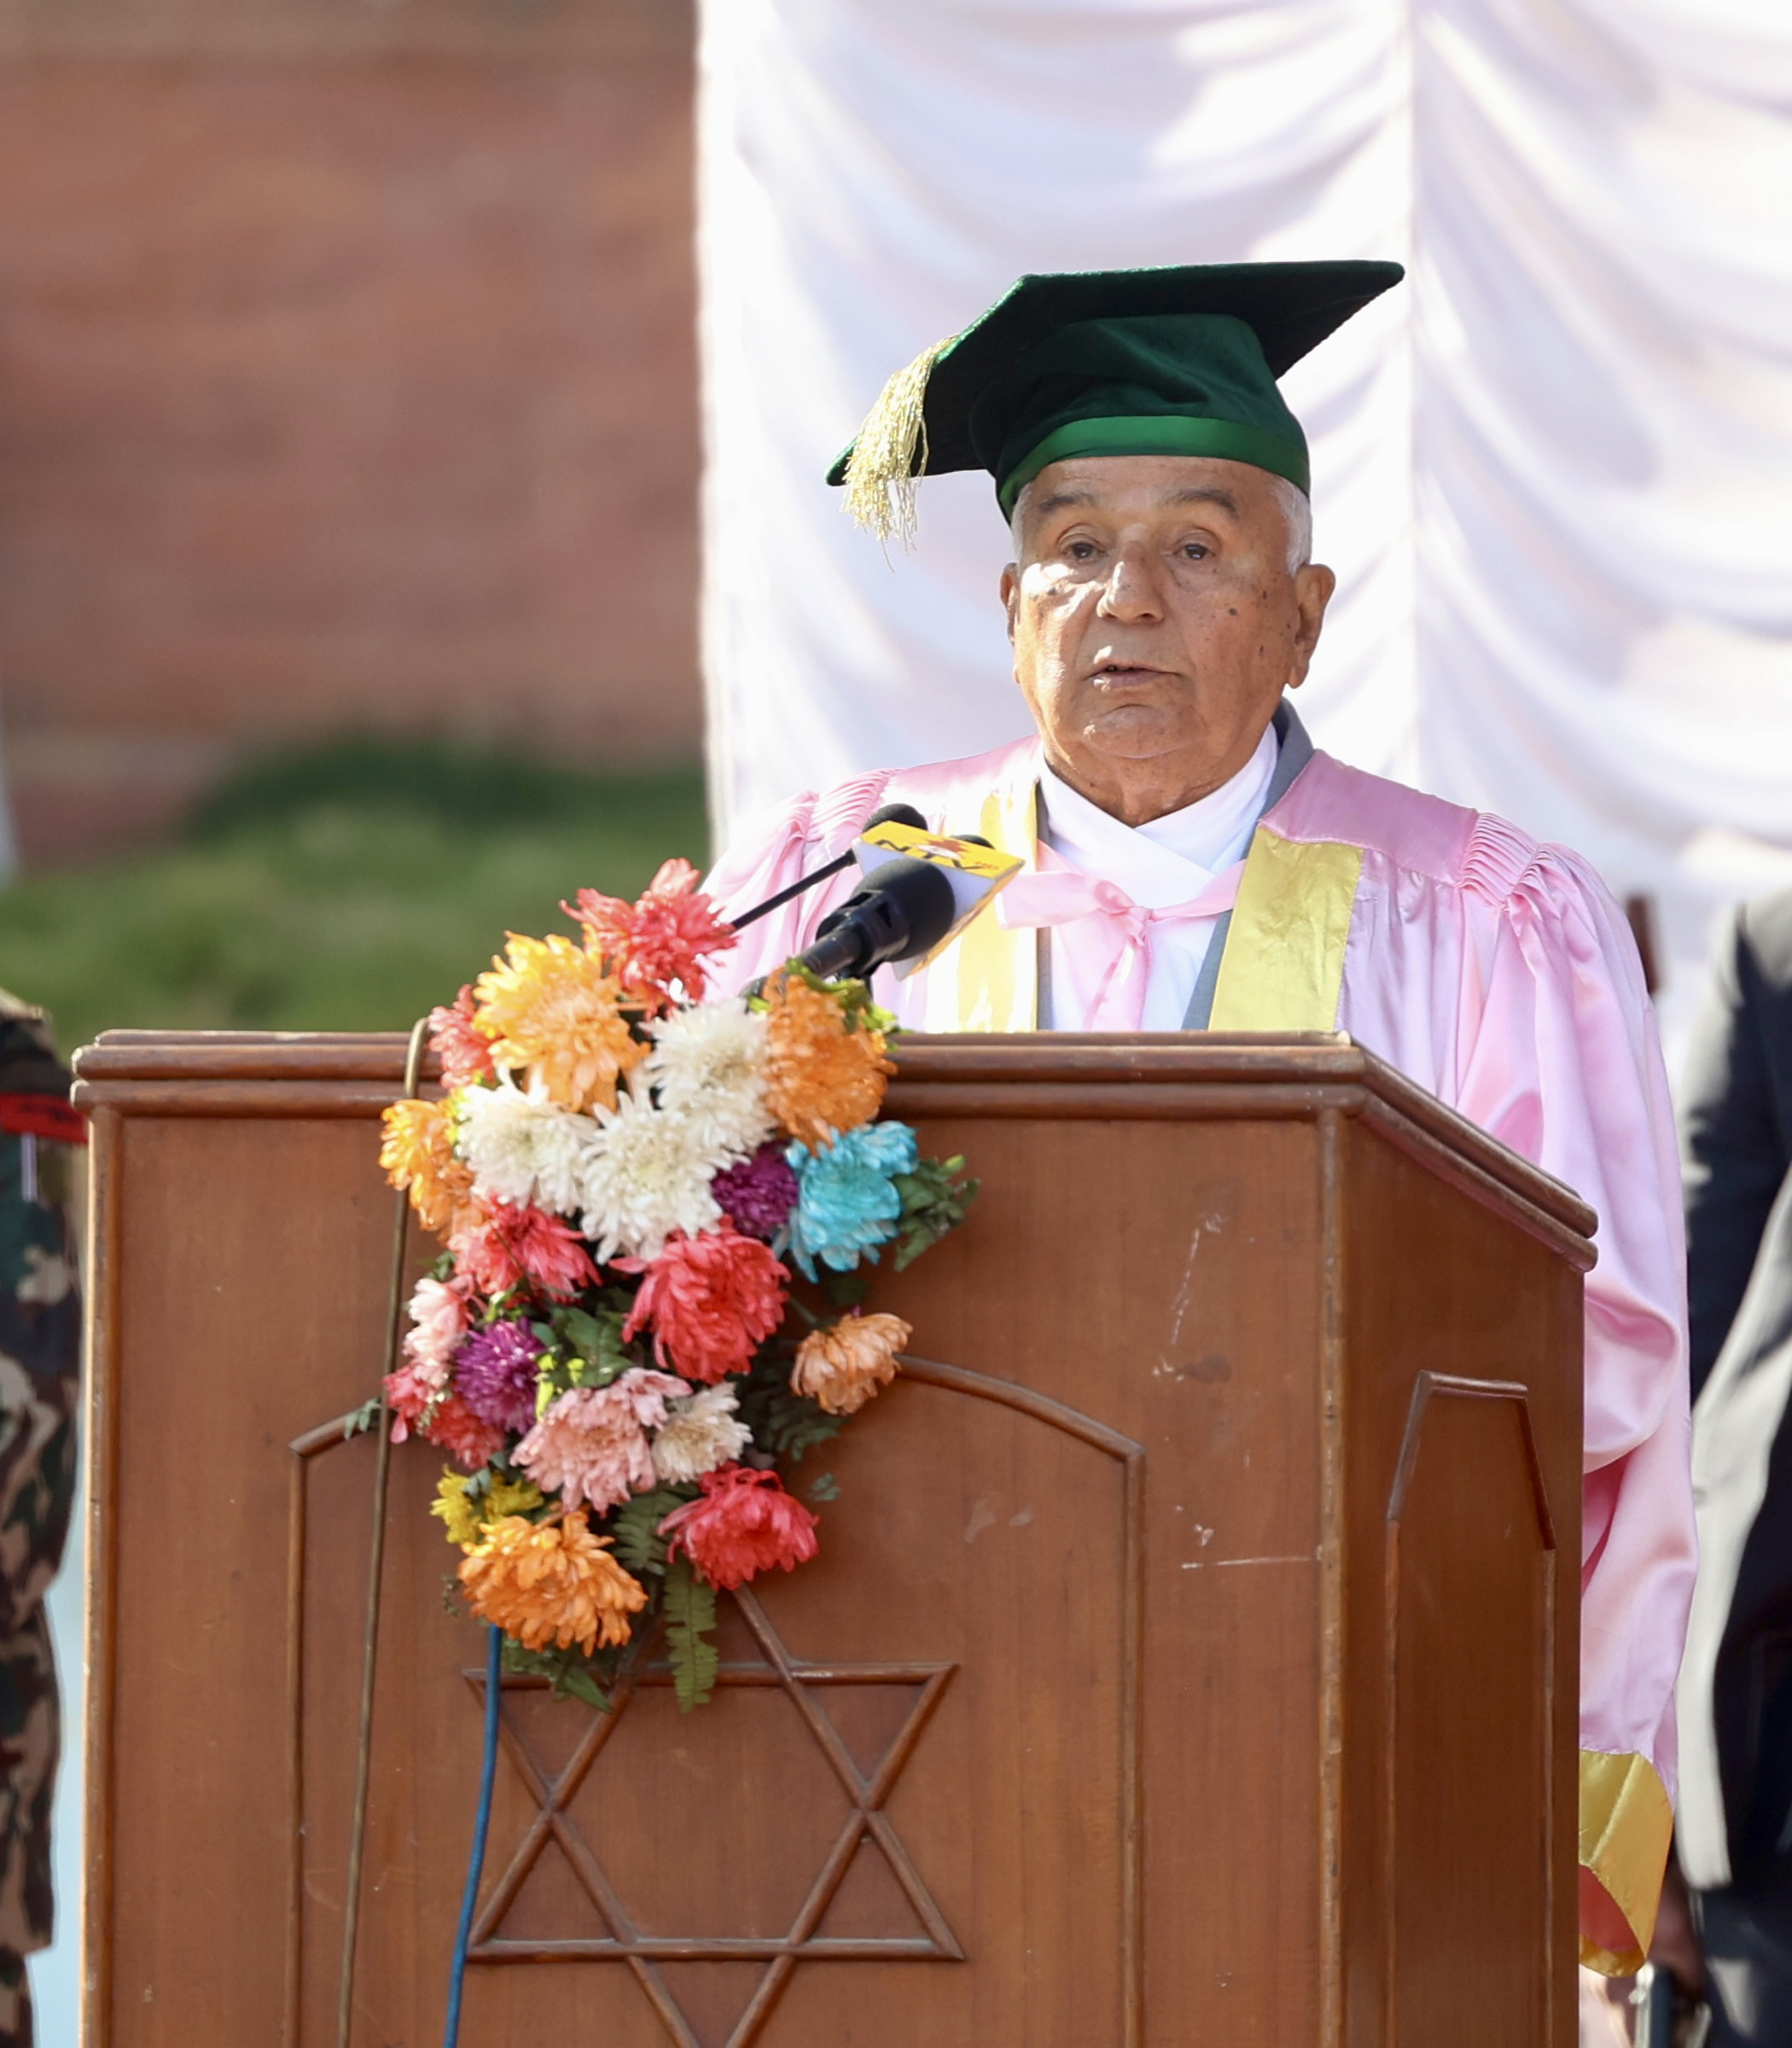 Result in education should be as per investment in this sector: President Paudel